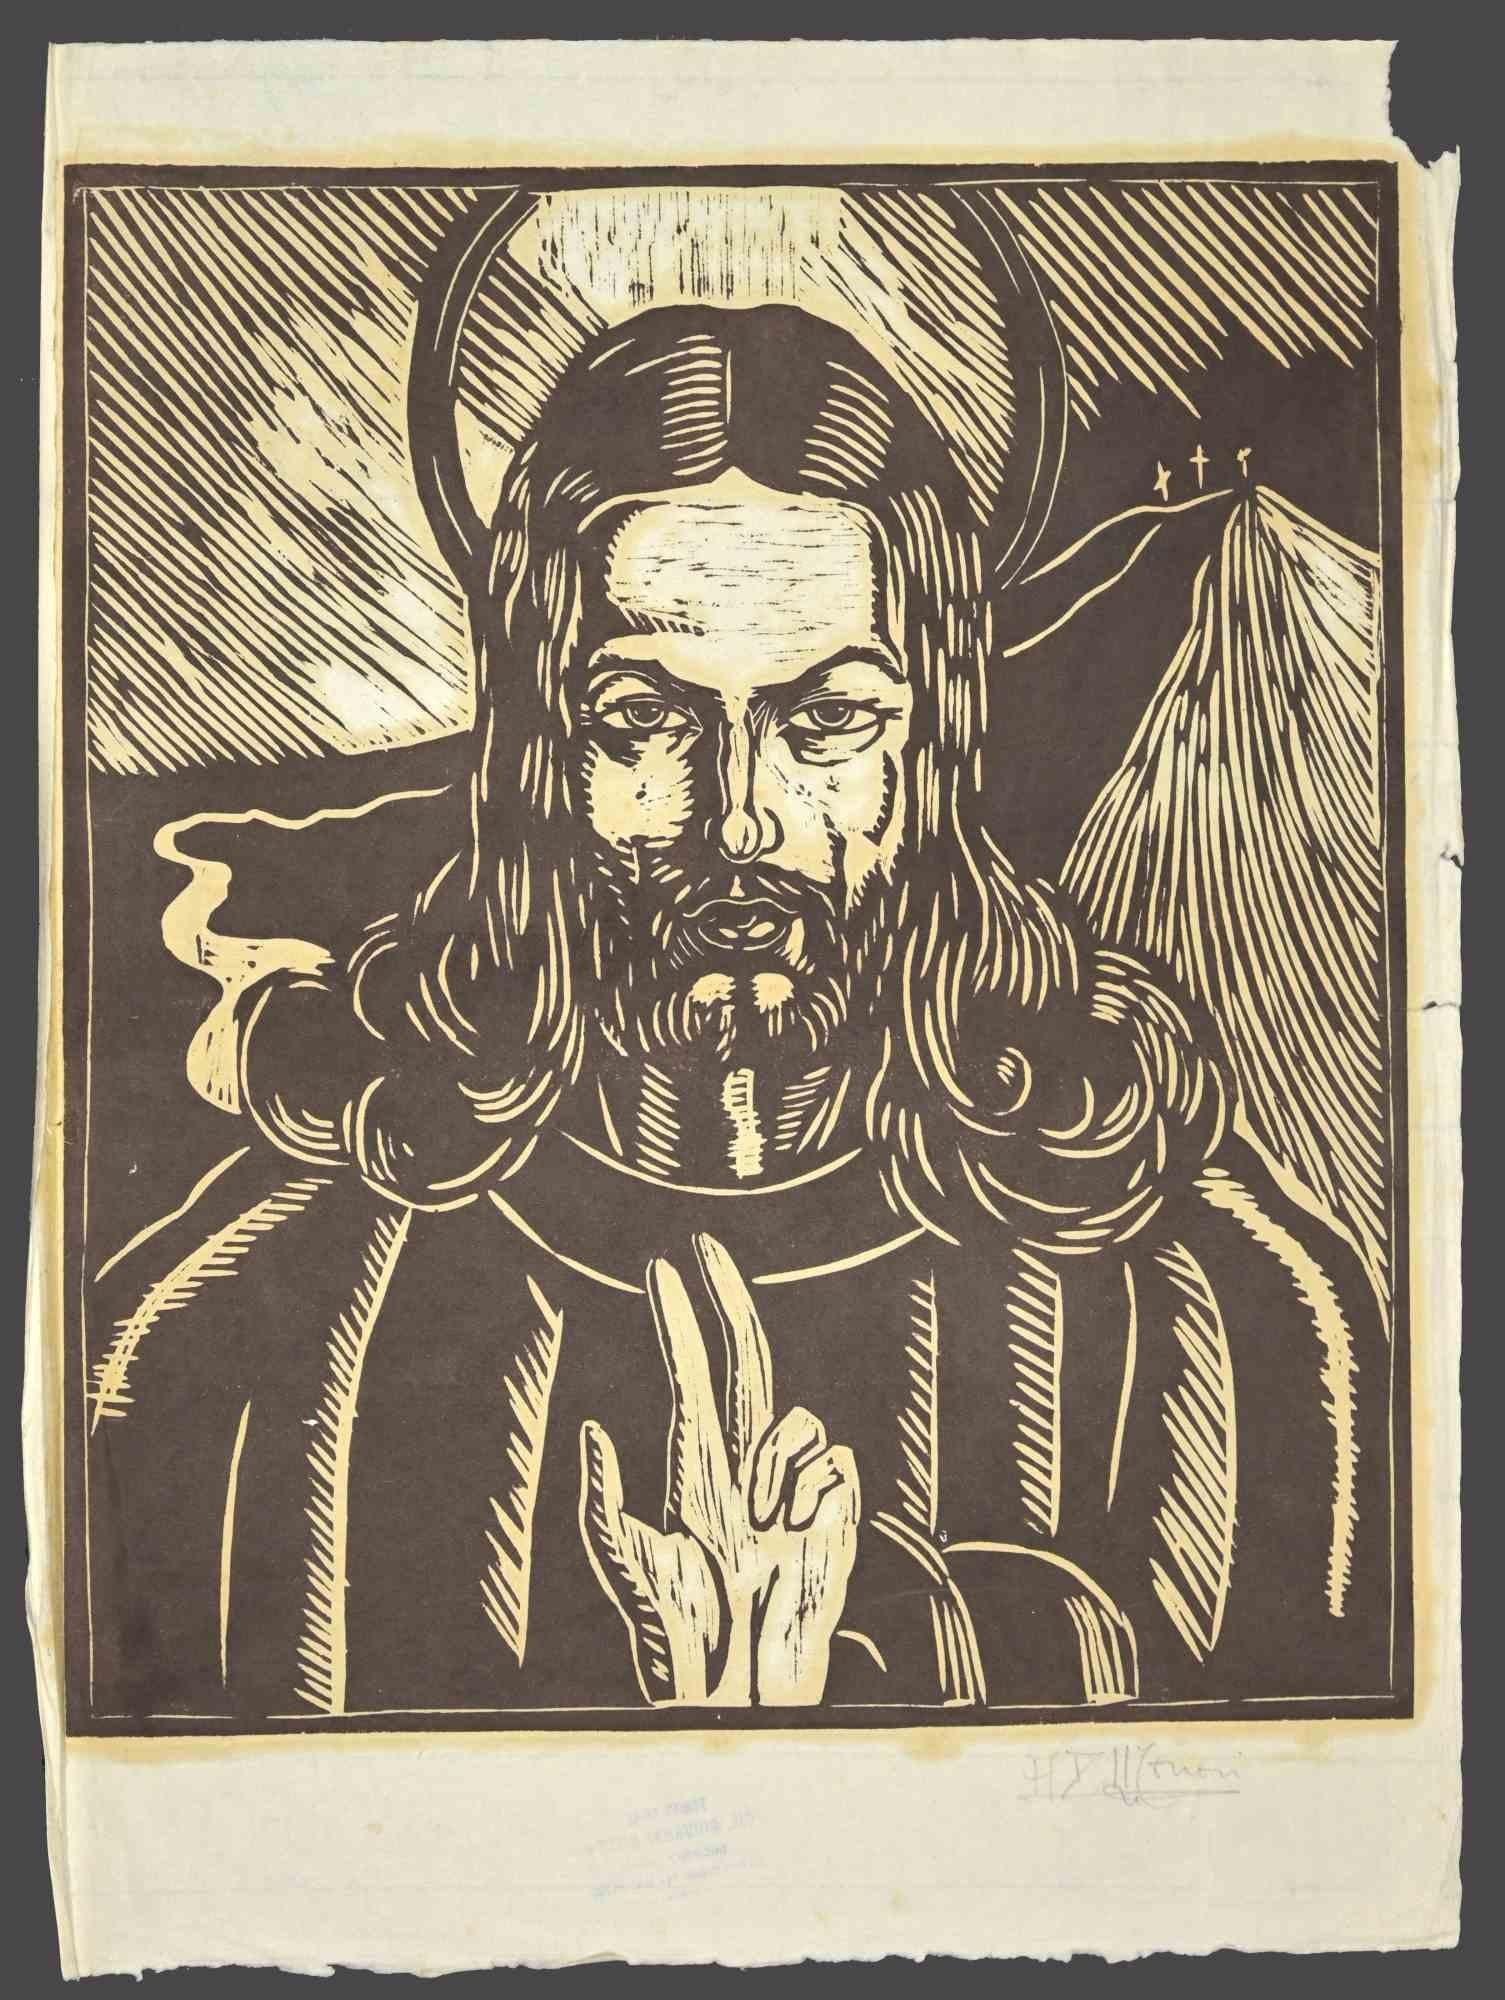 Christ is a woodcut print realized by  Augusto Monari in the Early-20th Century.

Good conditions.

The artwork is depicted through confident strokes in a well-balanced composition.